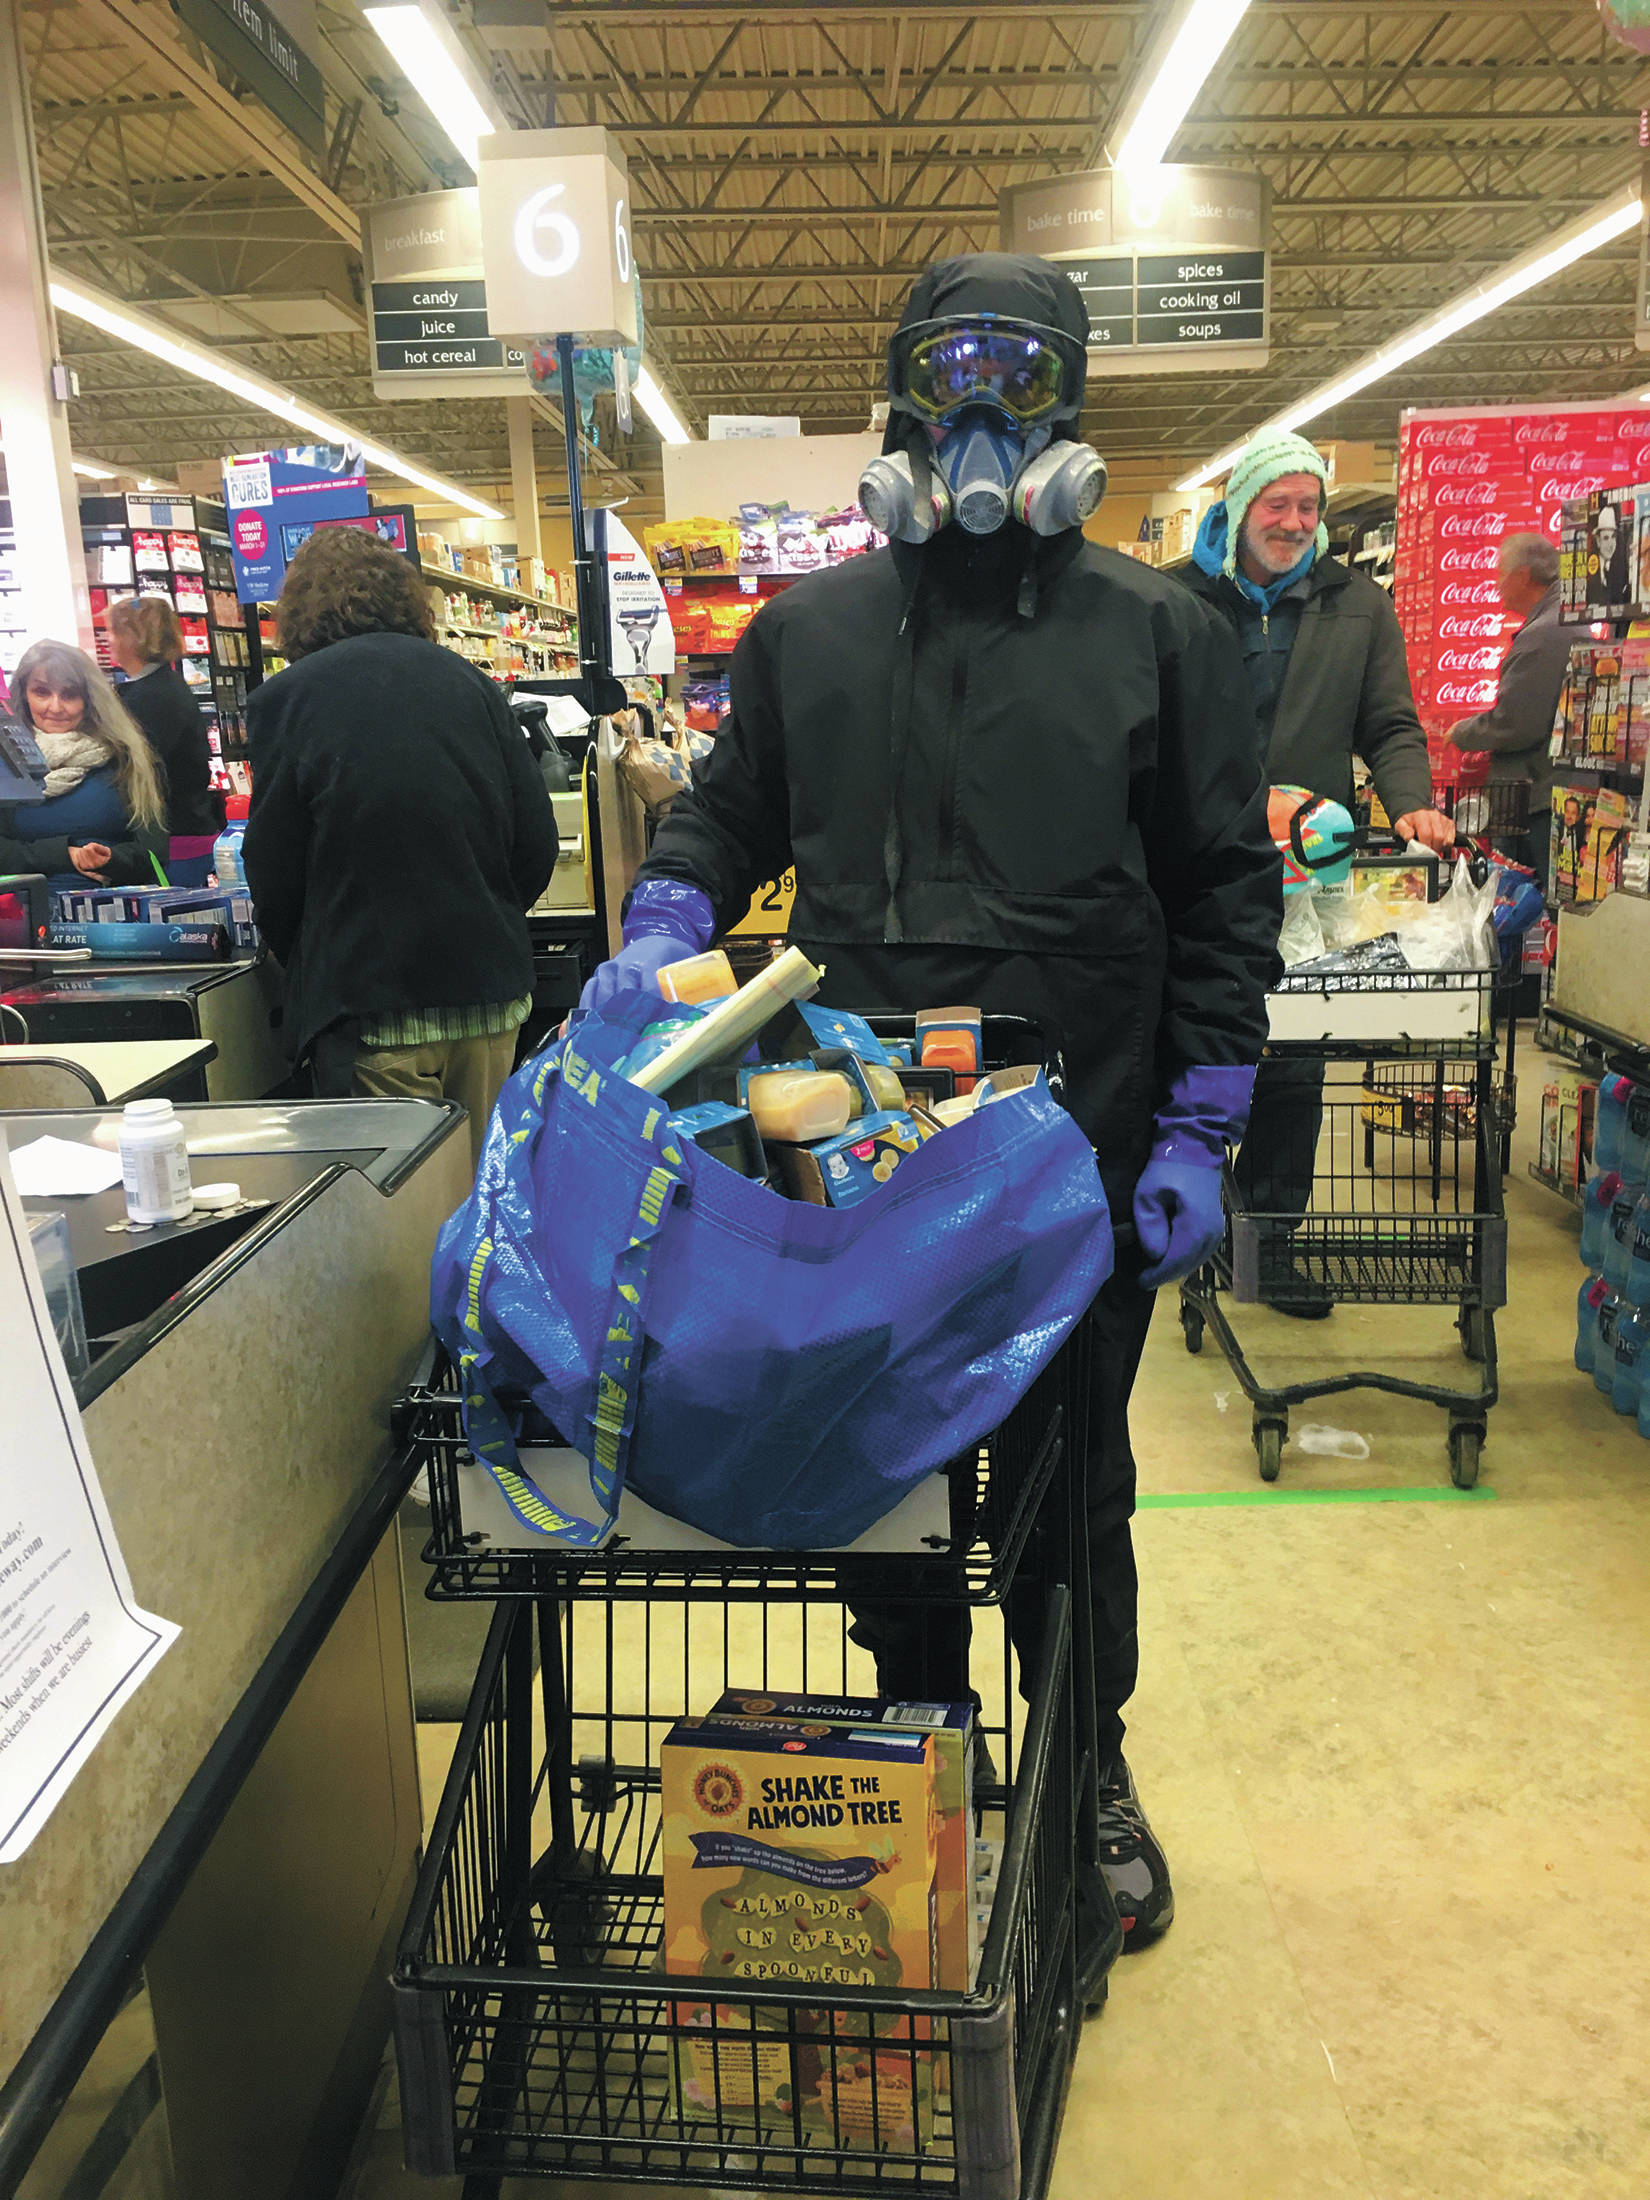 Bjørn Olson shops in protective gear for people who can’t go to the store themselves on March 23, 2020 at Safeway in Homer, Alaska. Olson volunteers each Monday to shop for the elderly, those at increased risk of contracting the novel coronavirus or those self isolating at home due to the spread of the illness it causes, COVID-19. (Photo by Megan Pacer/Homer News)